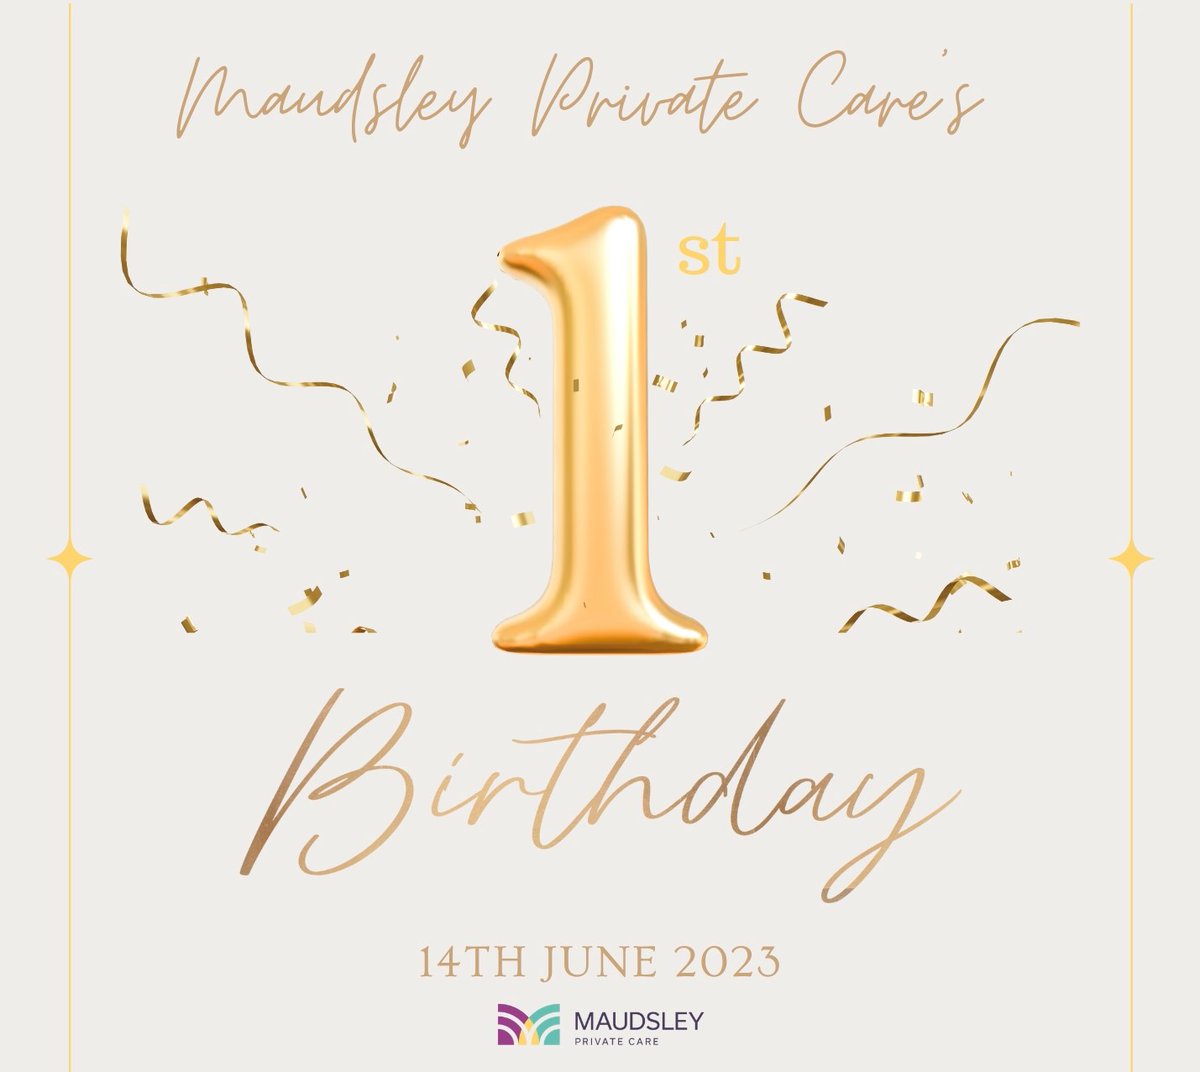 We are one today 🥳Thank you to our dedicated team & our highly skilled clinicians for growing with us this past year. We look forward to providing quick & easy access for families, young people and adults of all ages #MaudsleyPrivate #MaudsleyLearn #1stanniversary